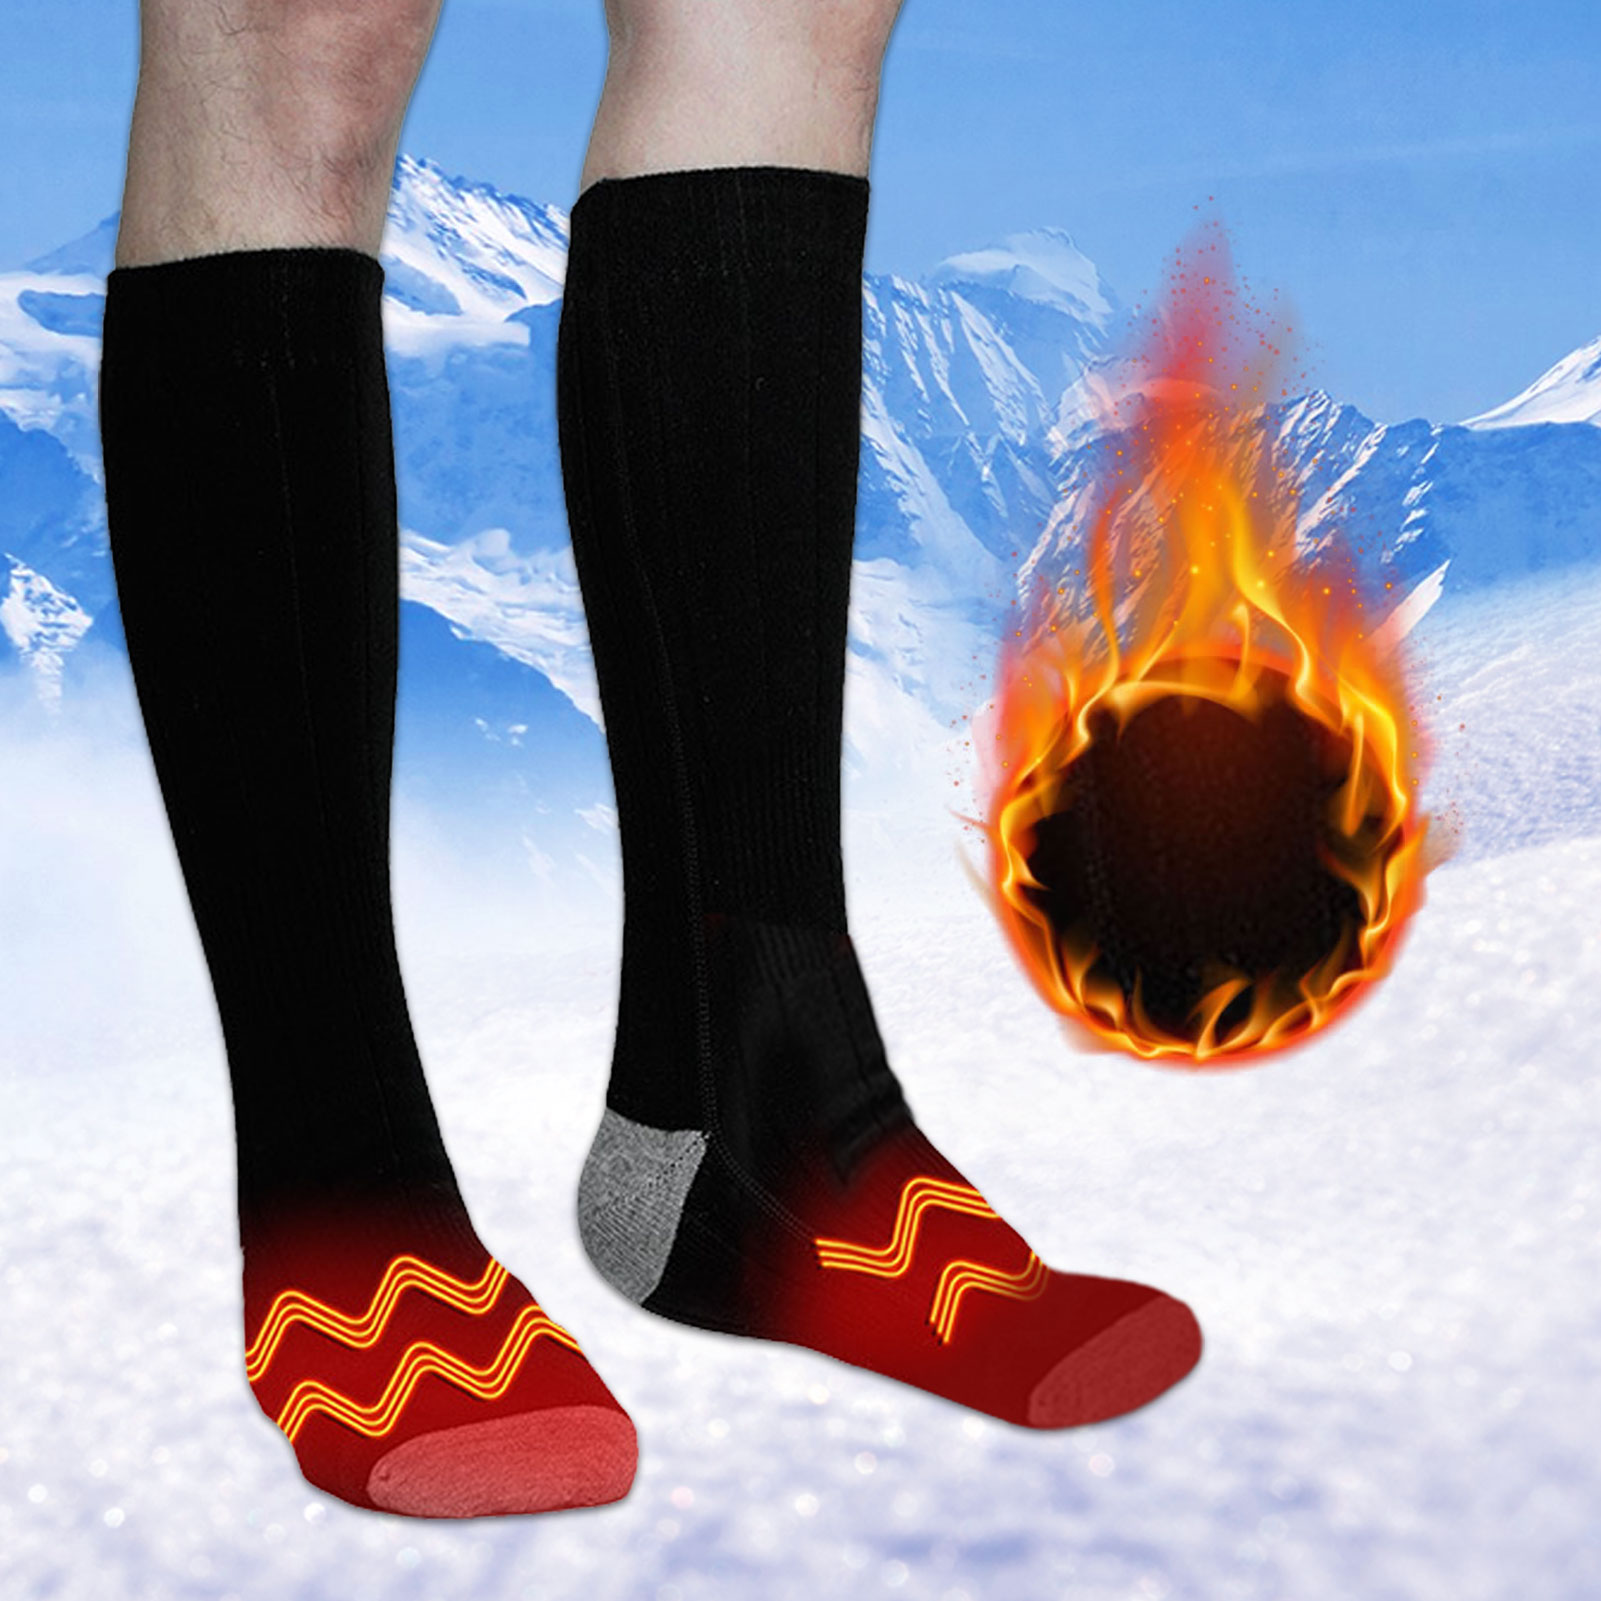 Heated Electric Thermal Socks, Battery Powered, Winter Foot Warmers for Men and Women, Warm Toes